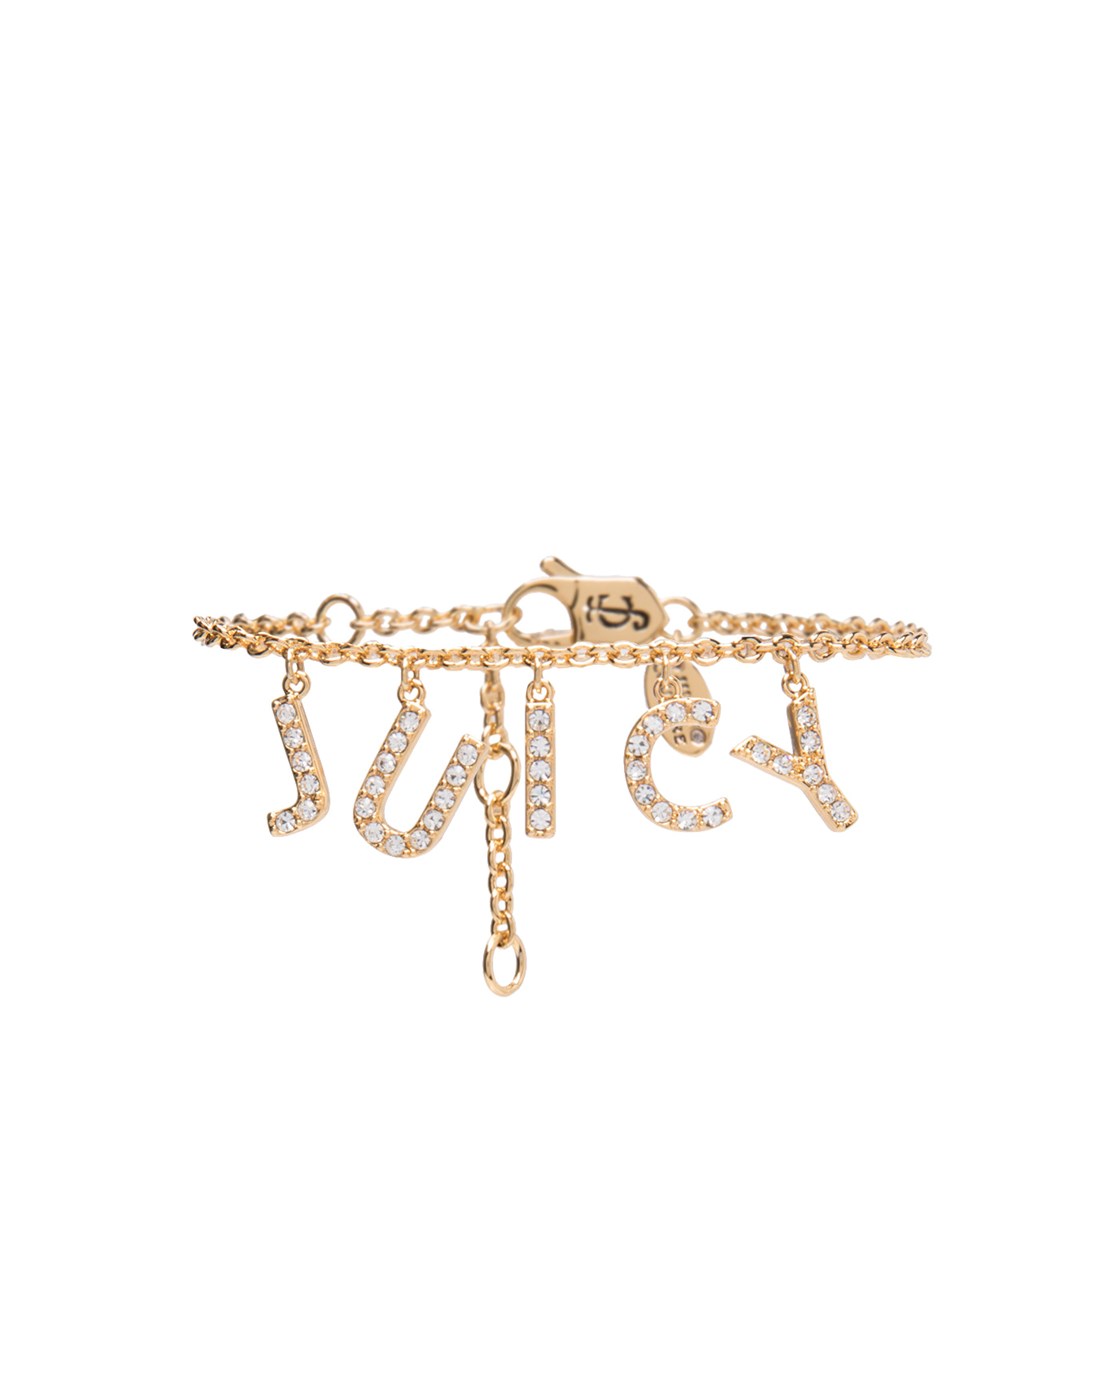 Juicy Couture PAVE CHARM LUXE WISHES BRACELET